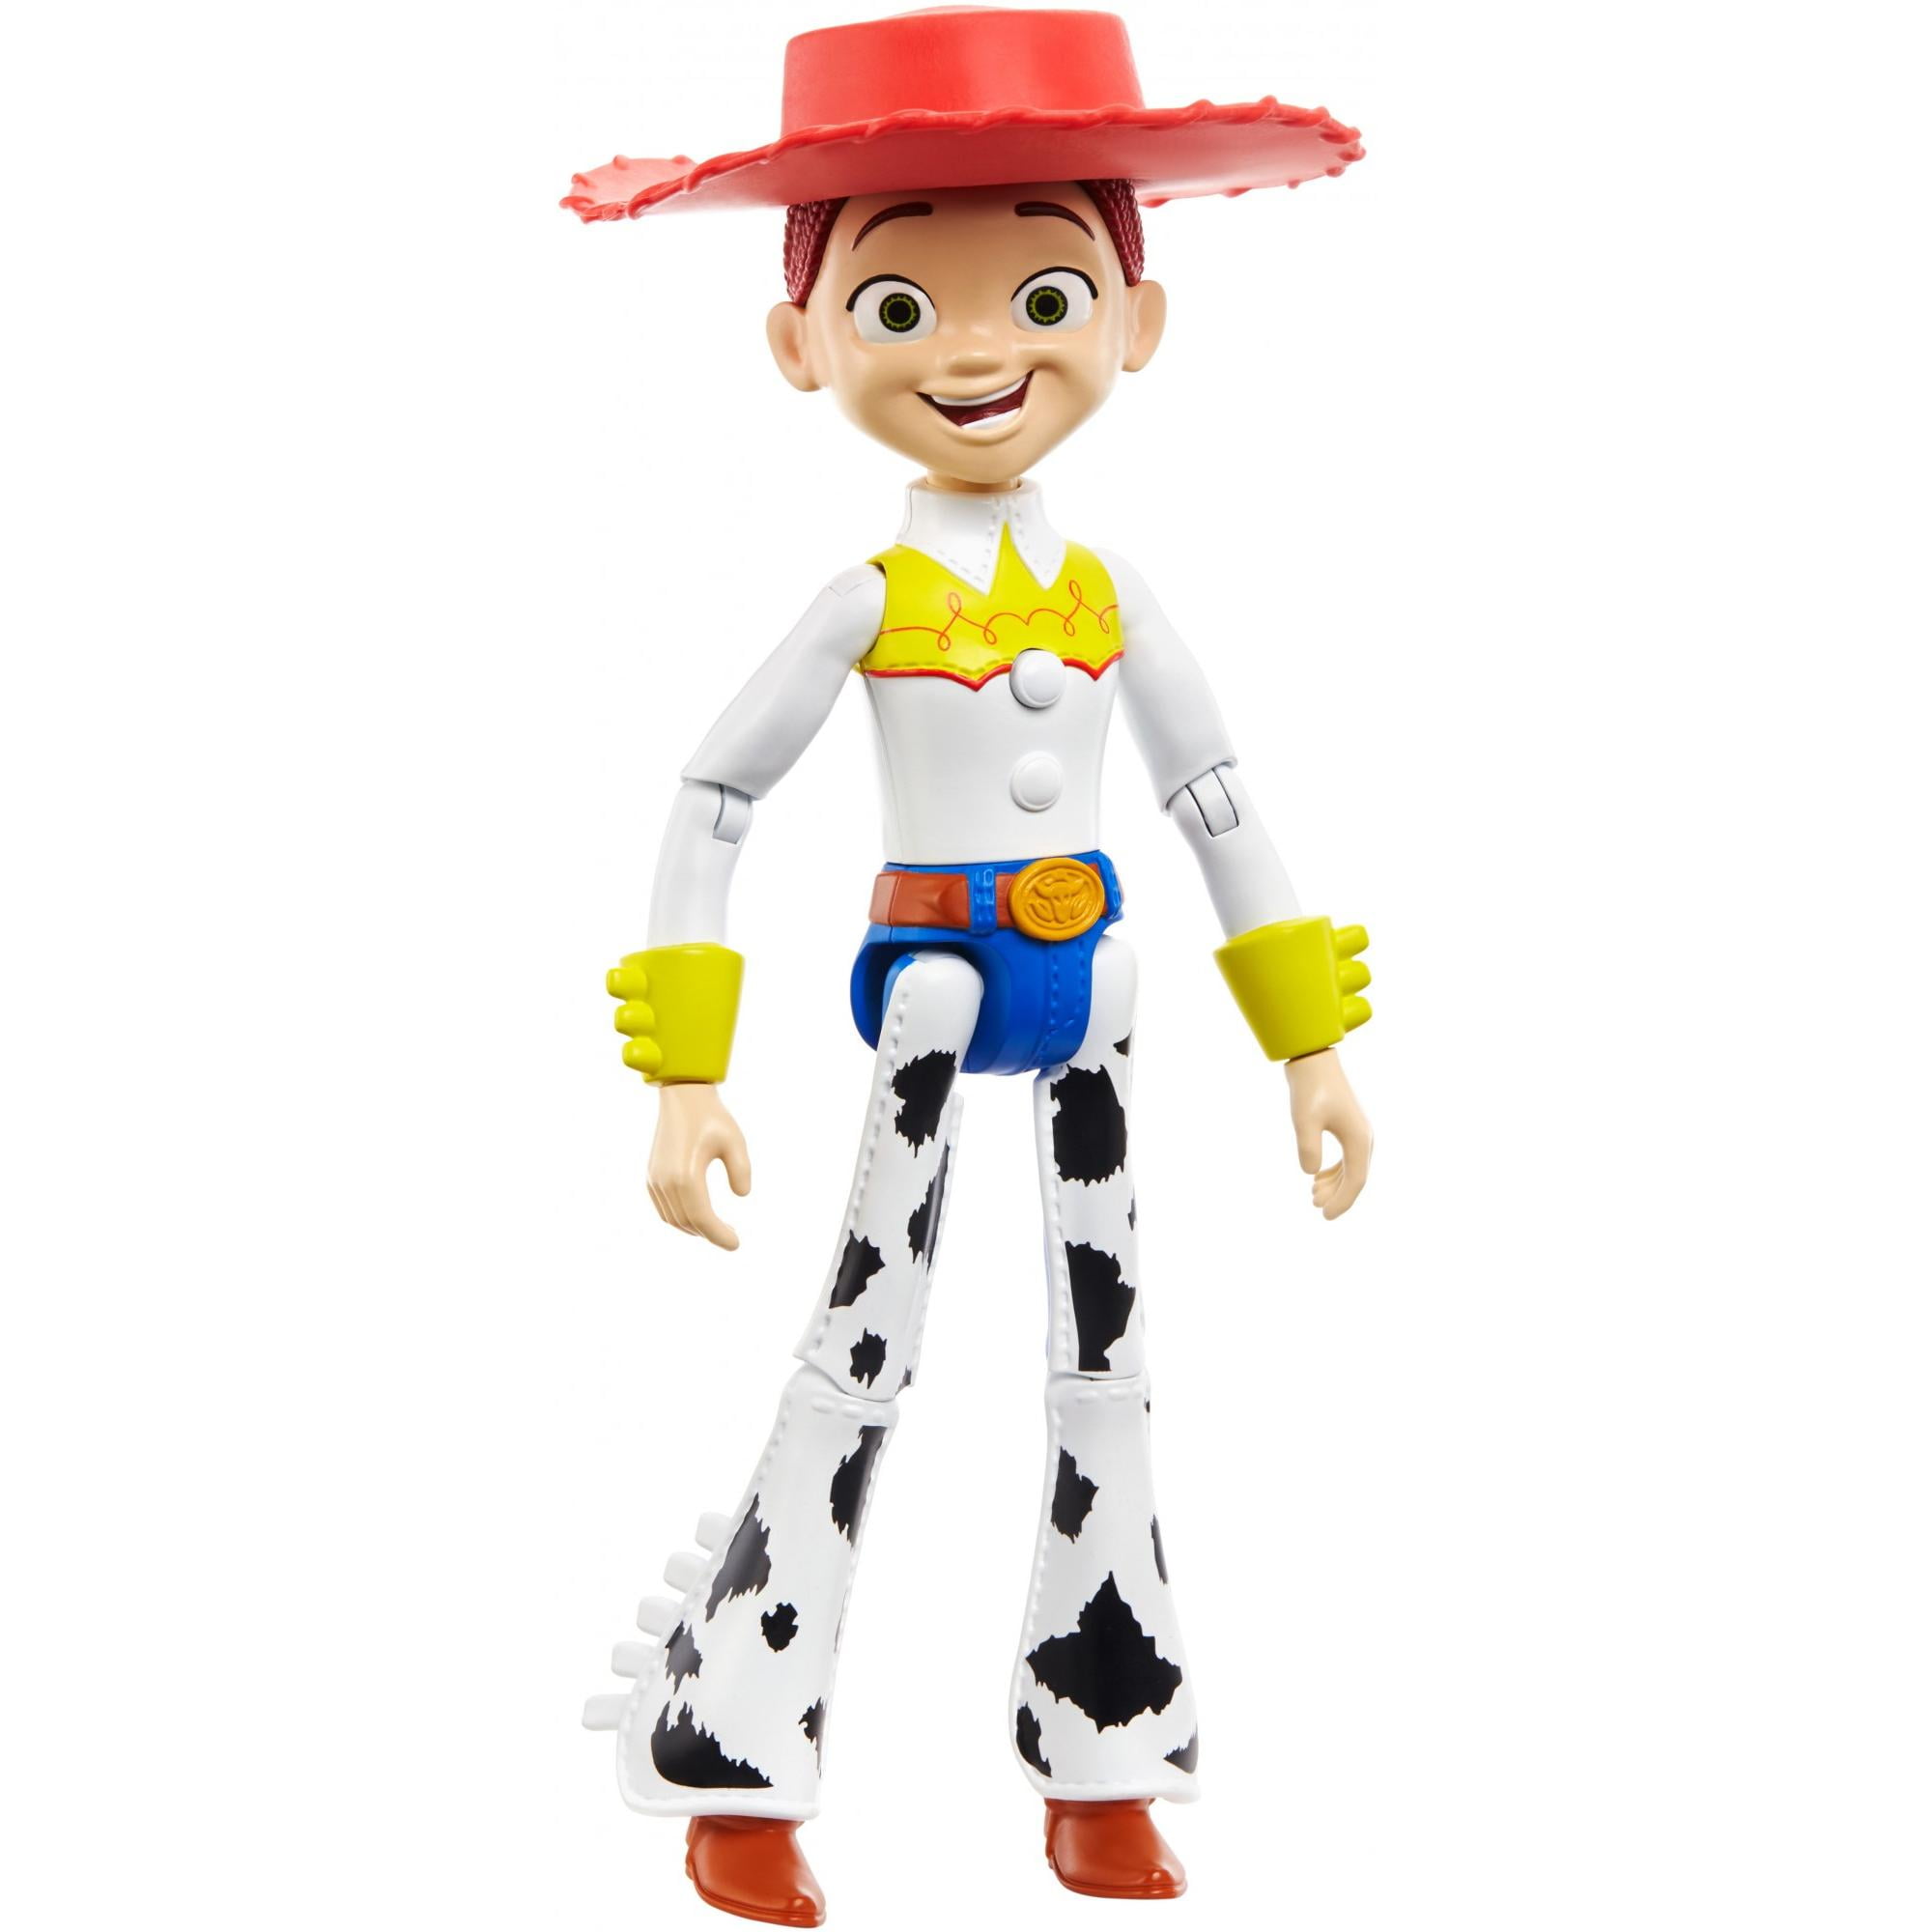 Toy Story 4 Disney and Pixar Toy Story Jessie Doll in True to Movie Scale  with Hair and Fashion Accessories Disney Movie Doll Girls Gift for Ages 3